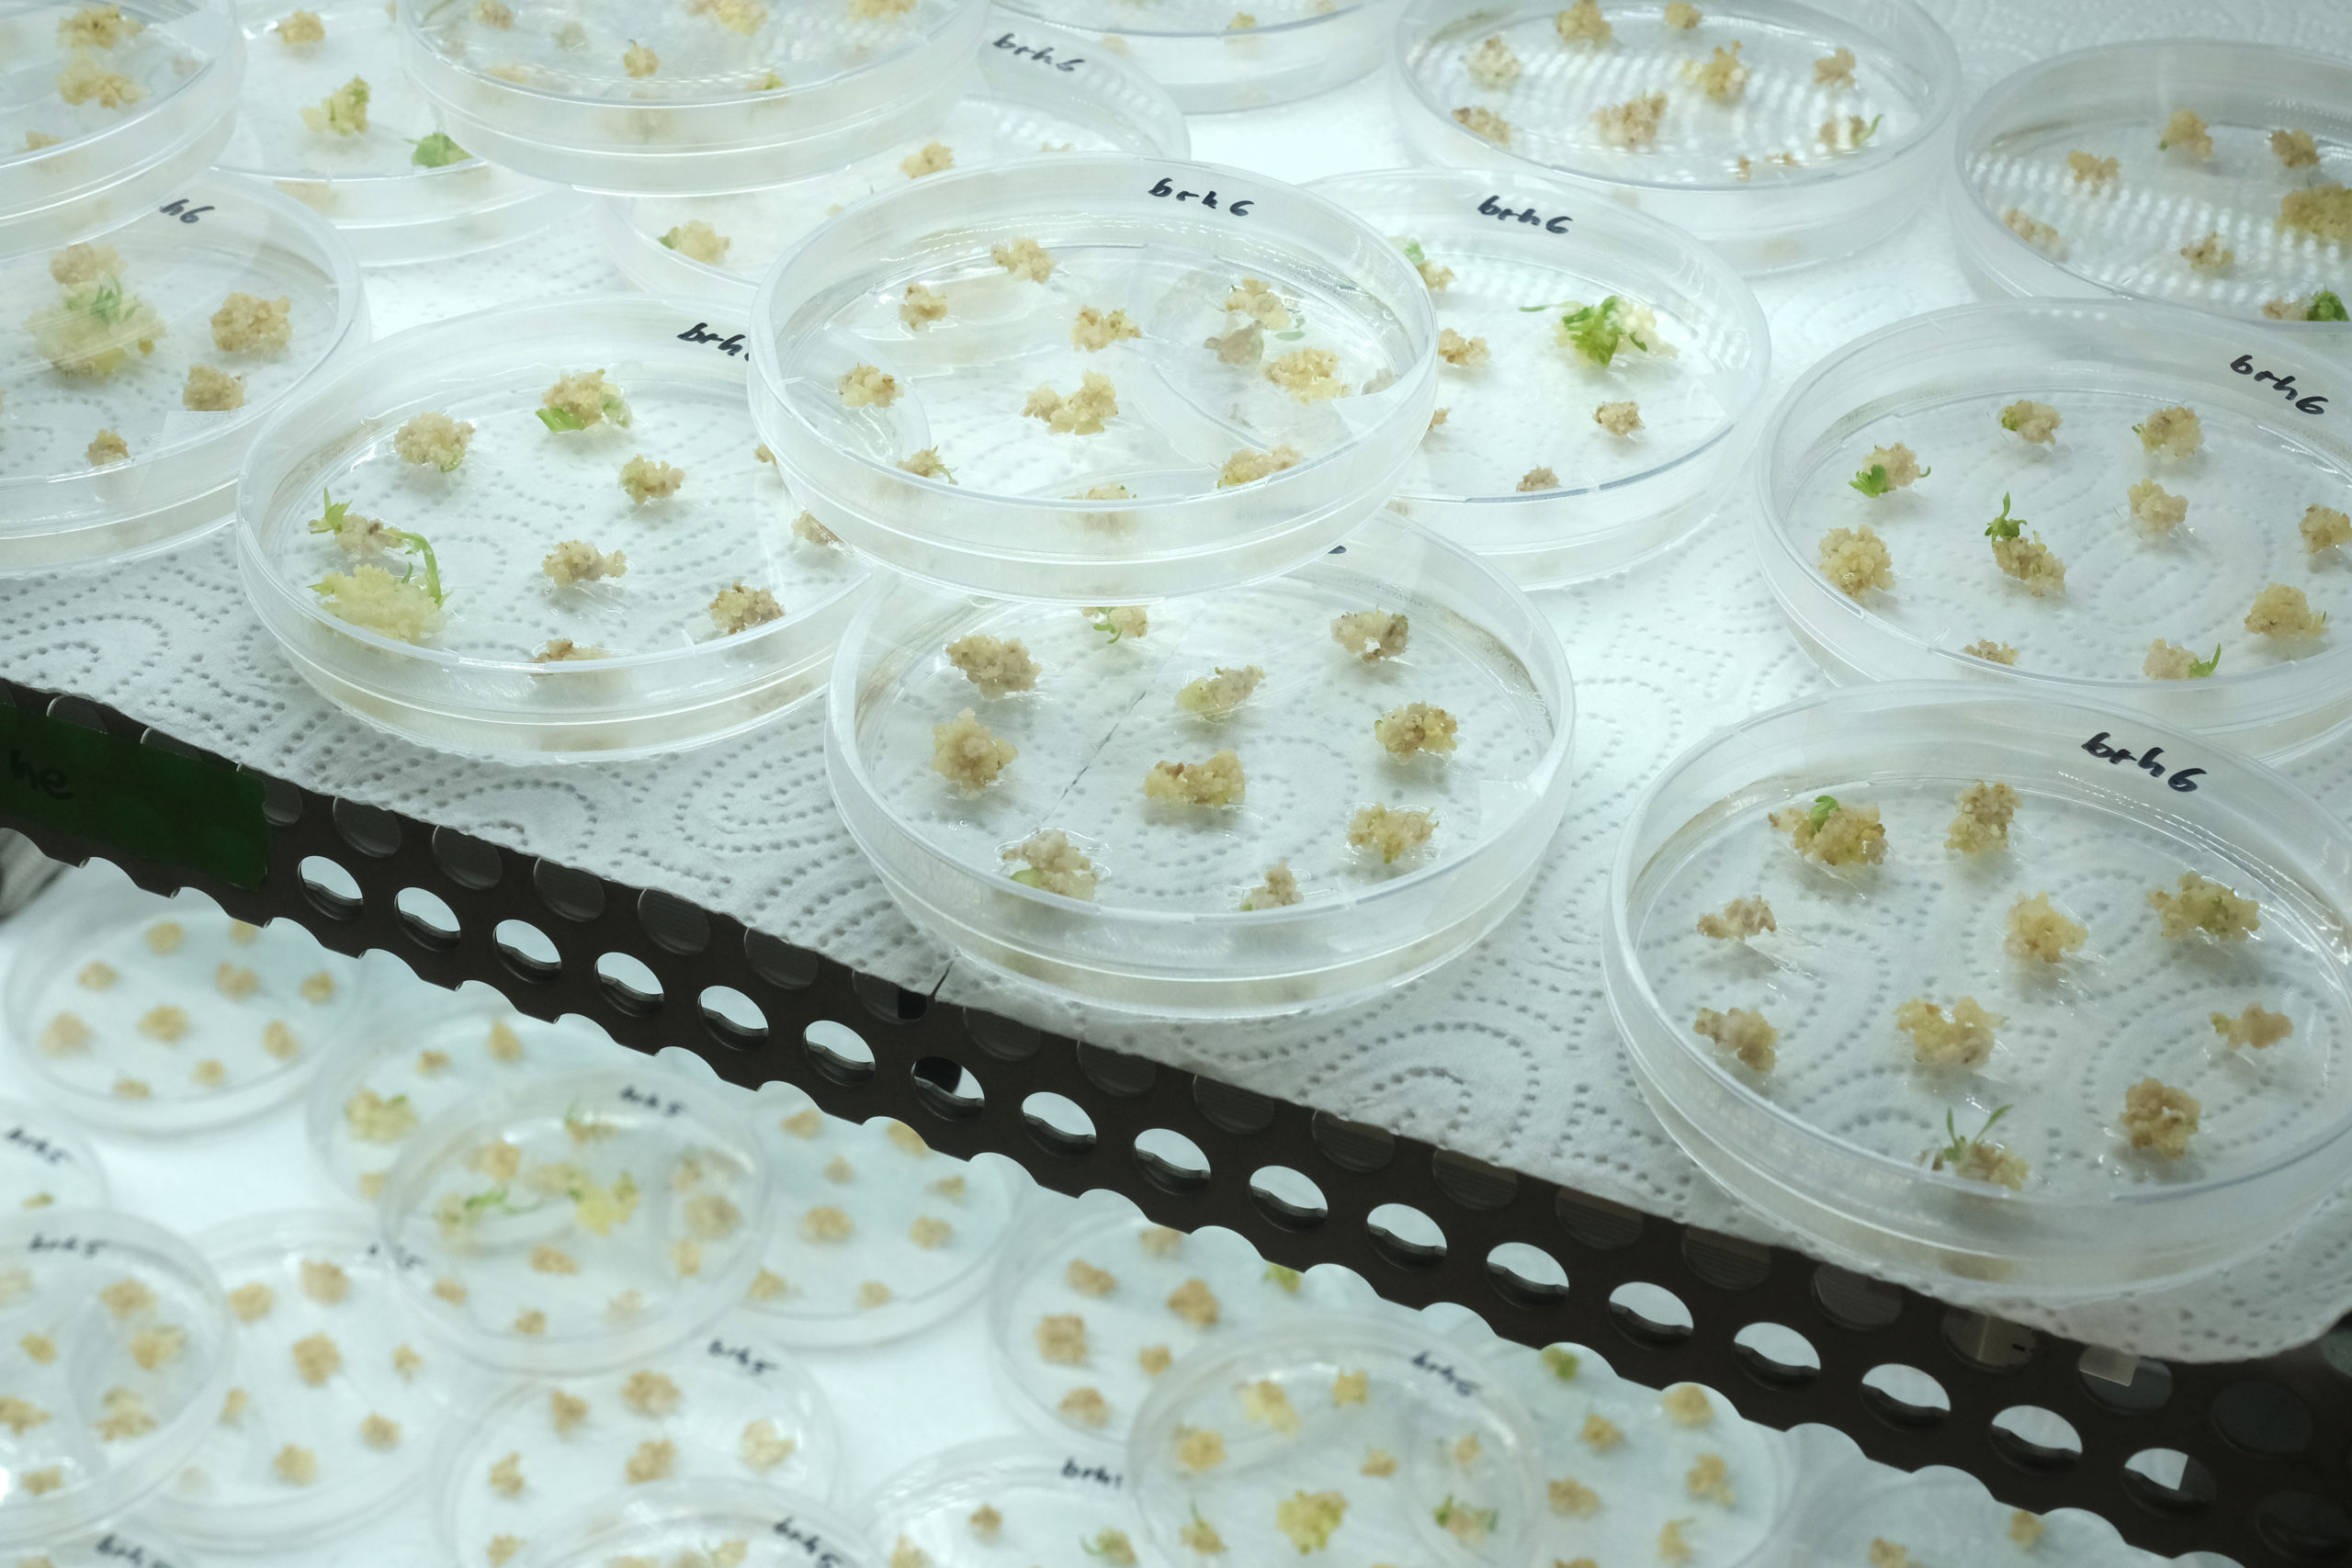 Petri dishes containing sprouting barley embryos that have received spliced genetic material derived through the CRISPR-Cas9 editing process. (Photo by Sean Gallup/Getty Images)